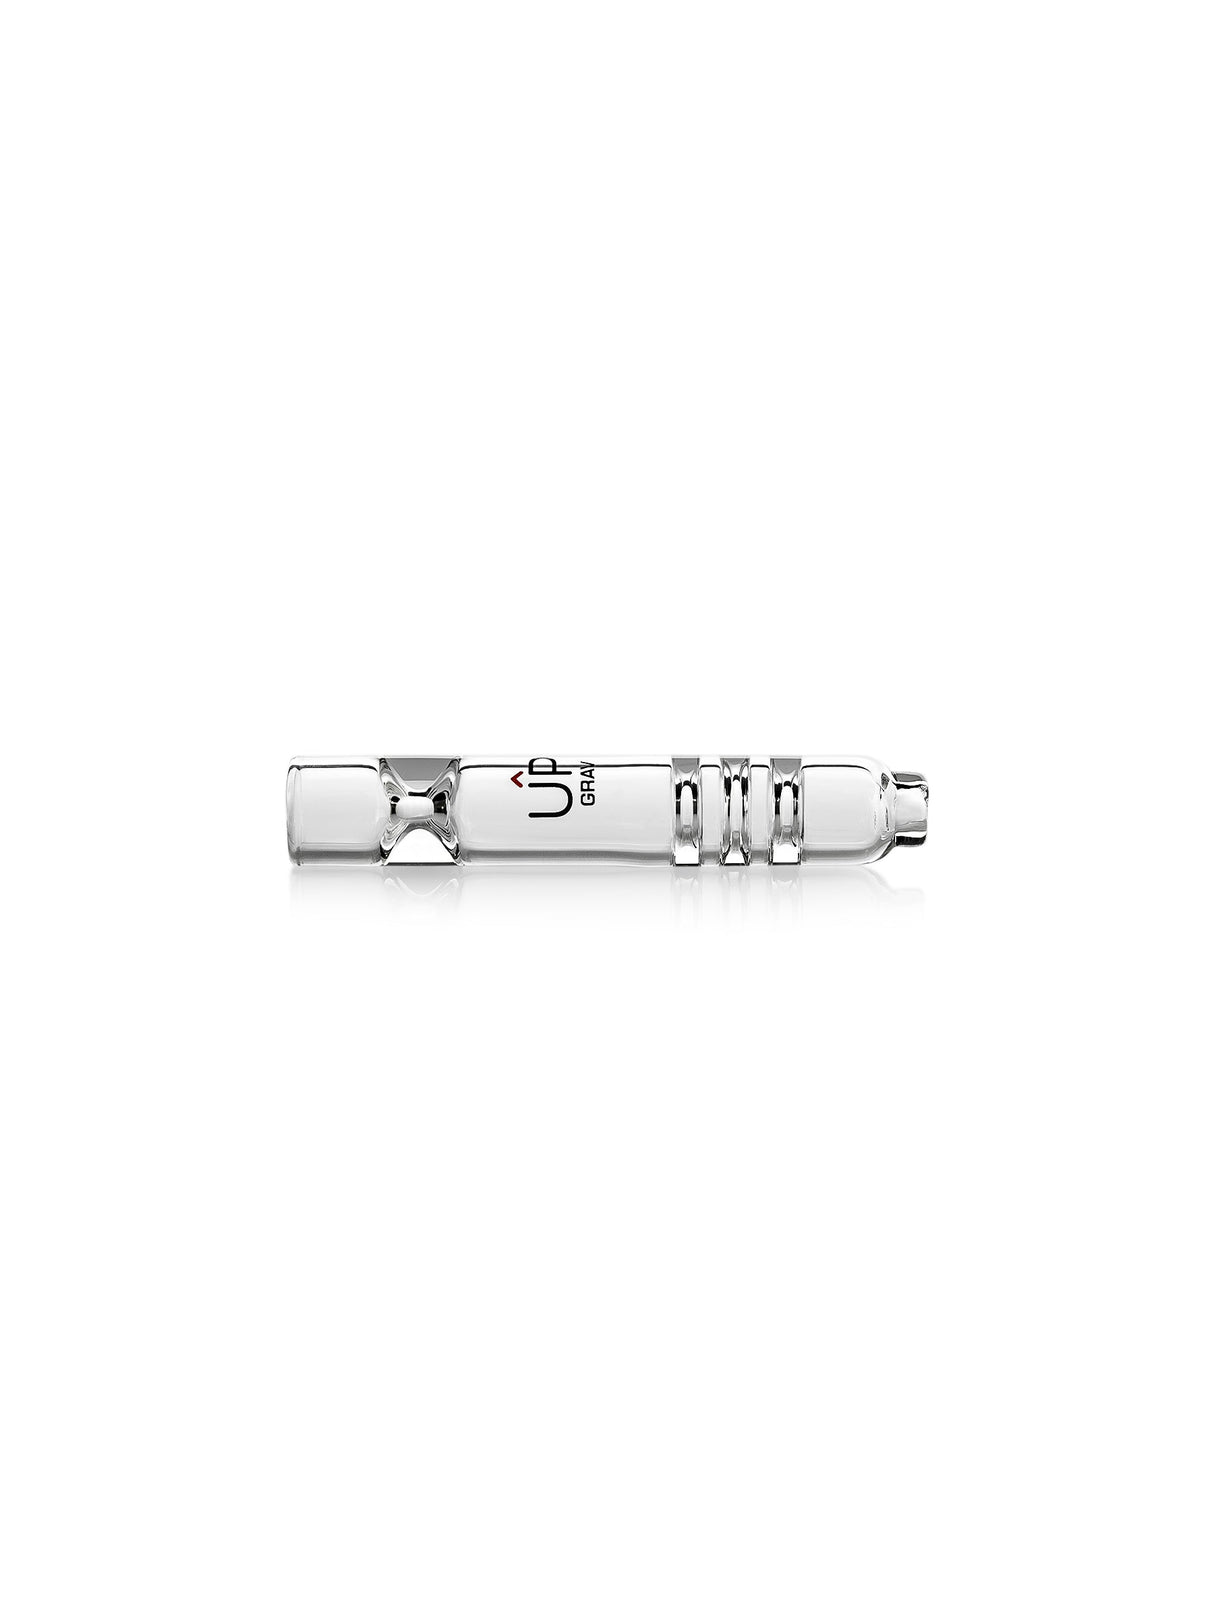 GRAV 3" Upline Taster hand pipe in clear with black label, compact and portable design